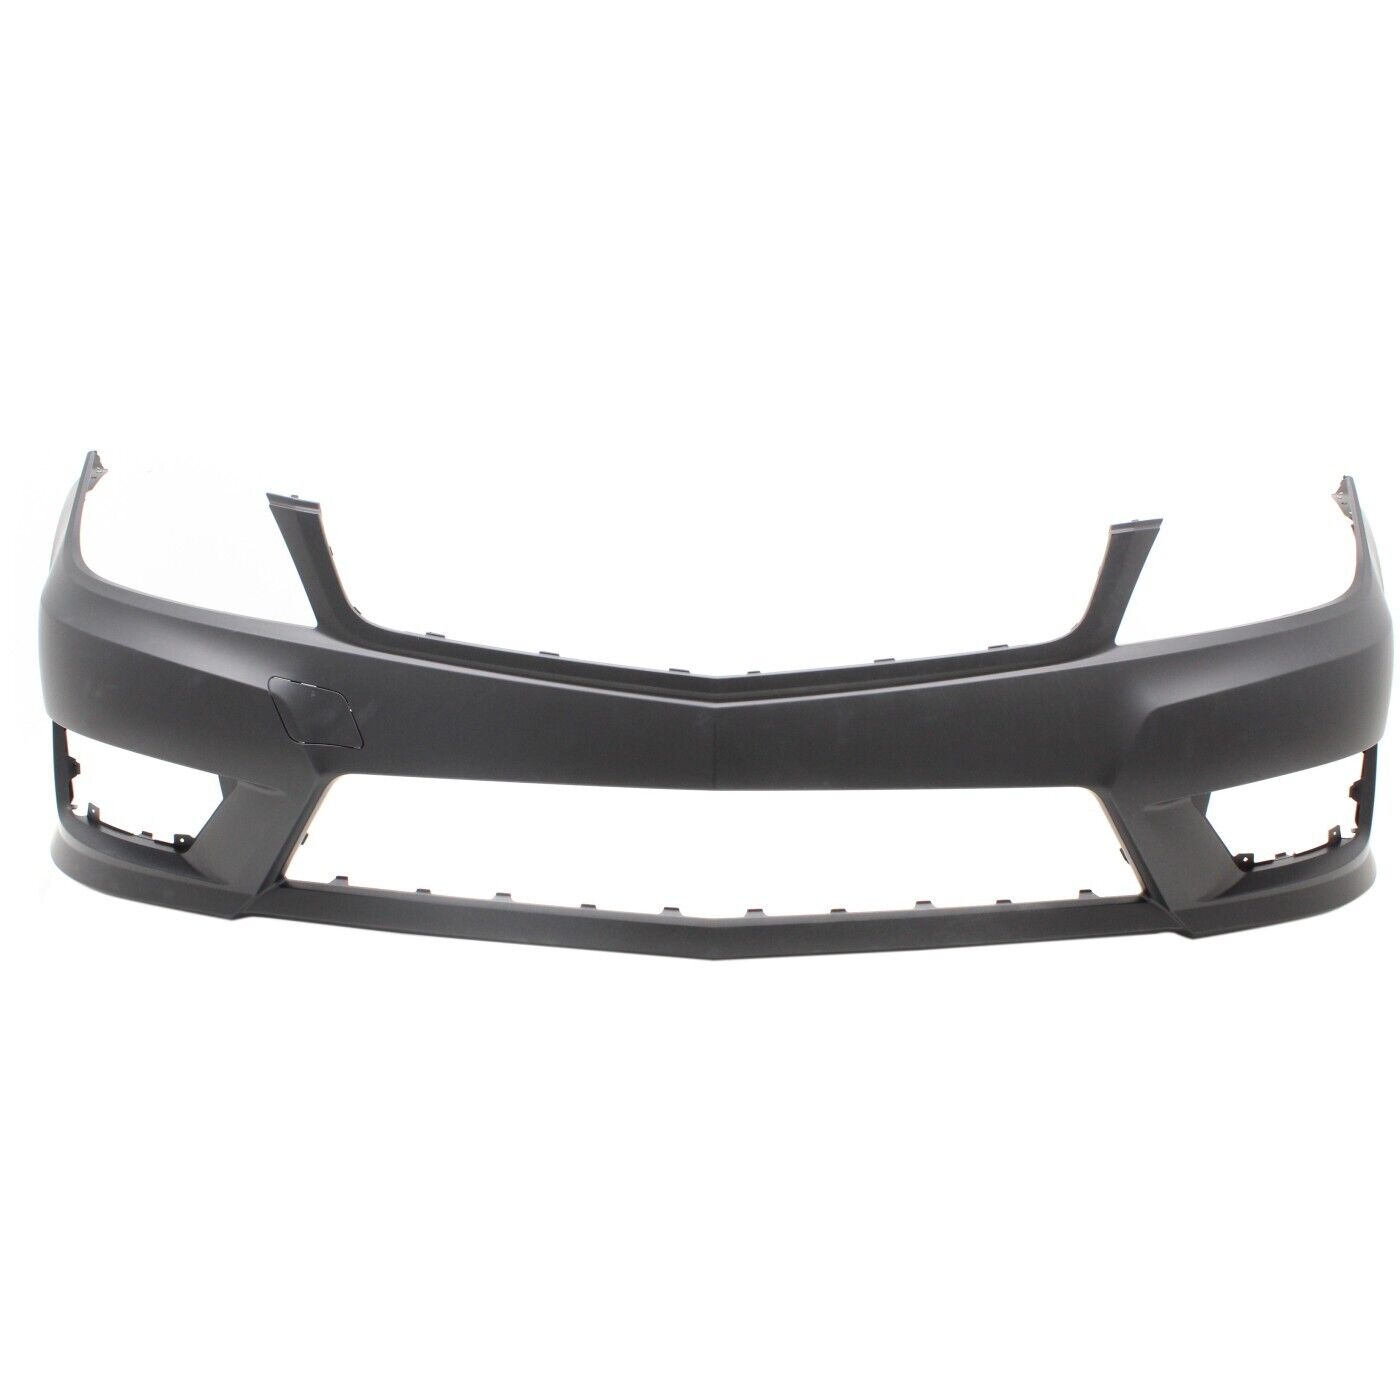 Front Bumper Cover For 2012-2015 M Benz C250 w/ fog lamp holes 12-14 C300 Primed